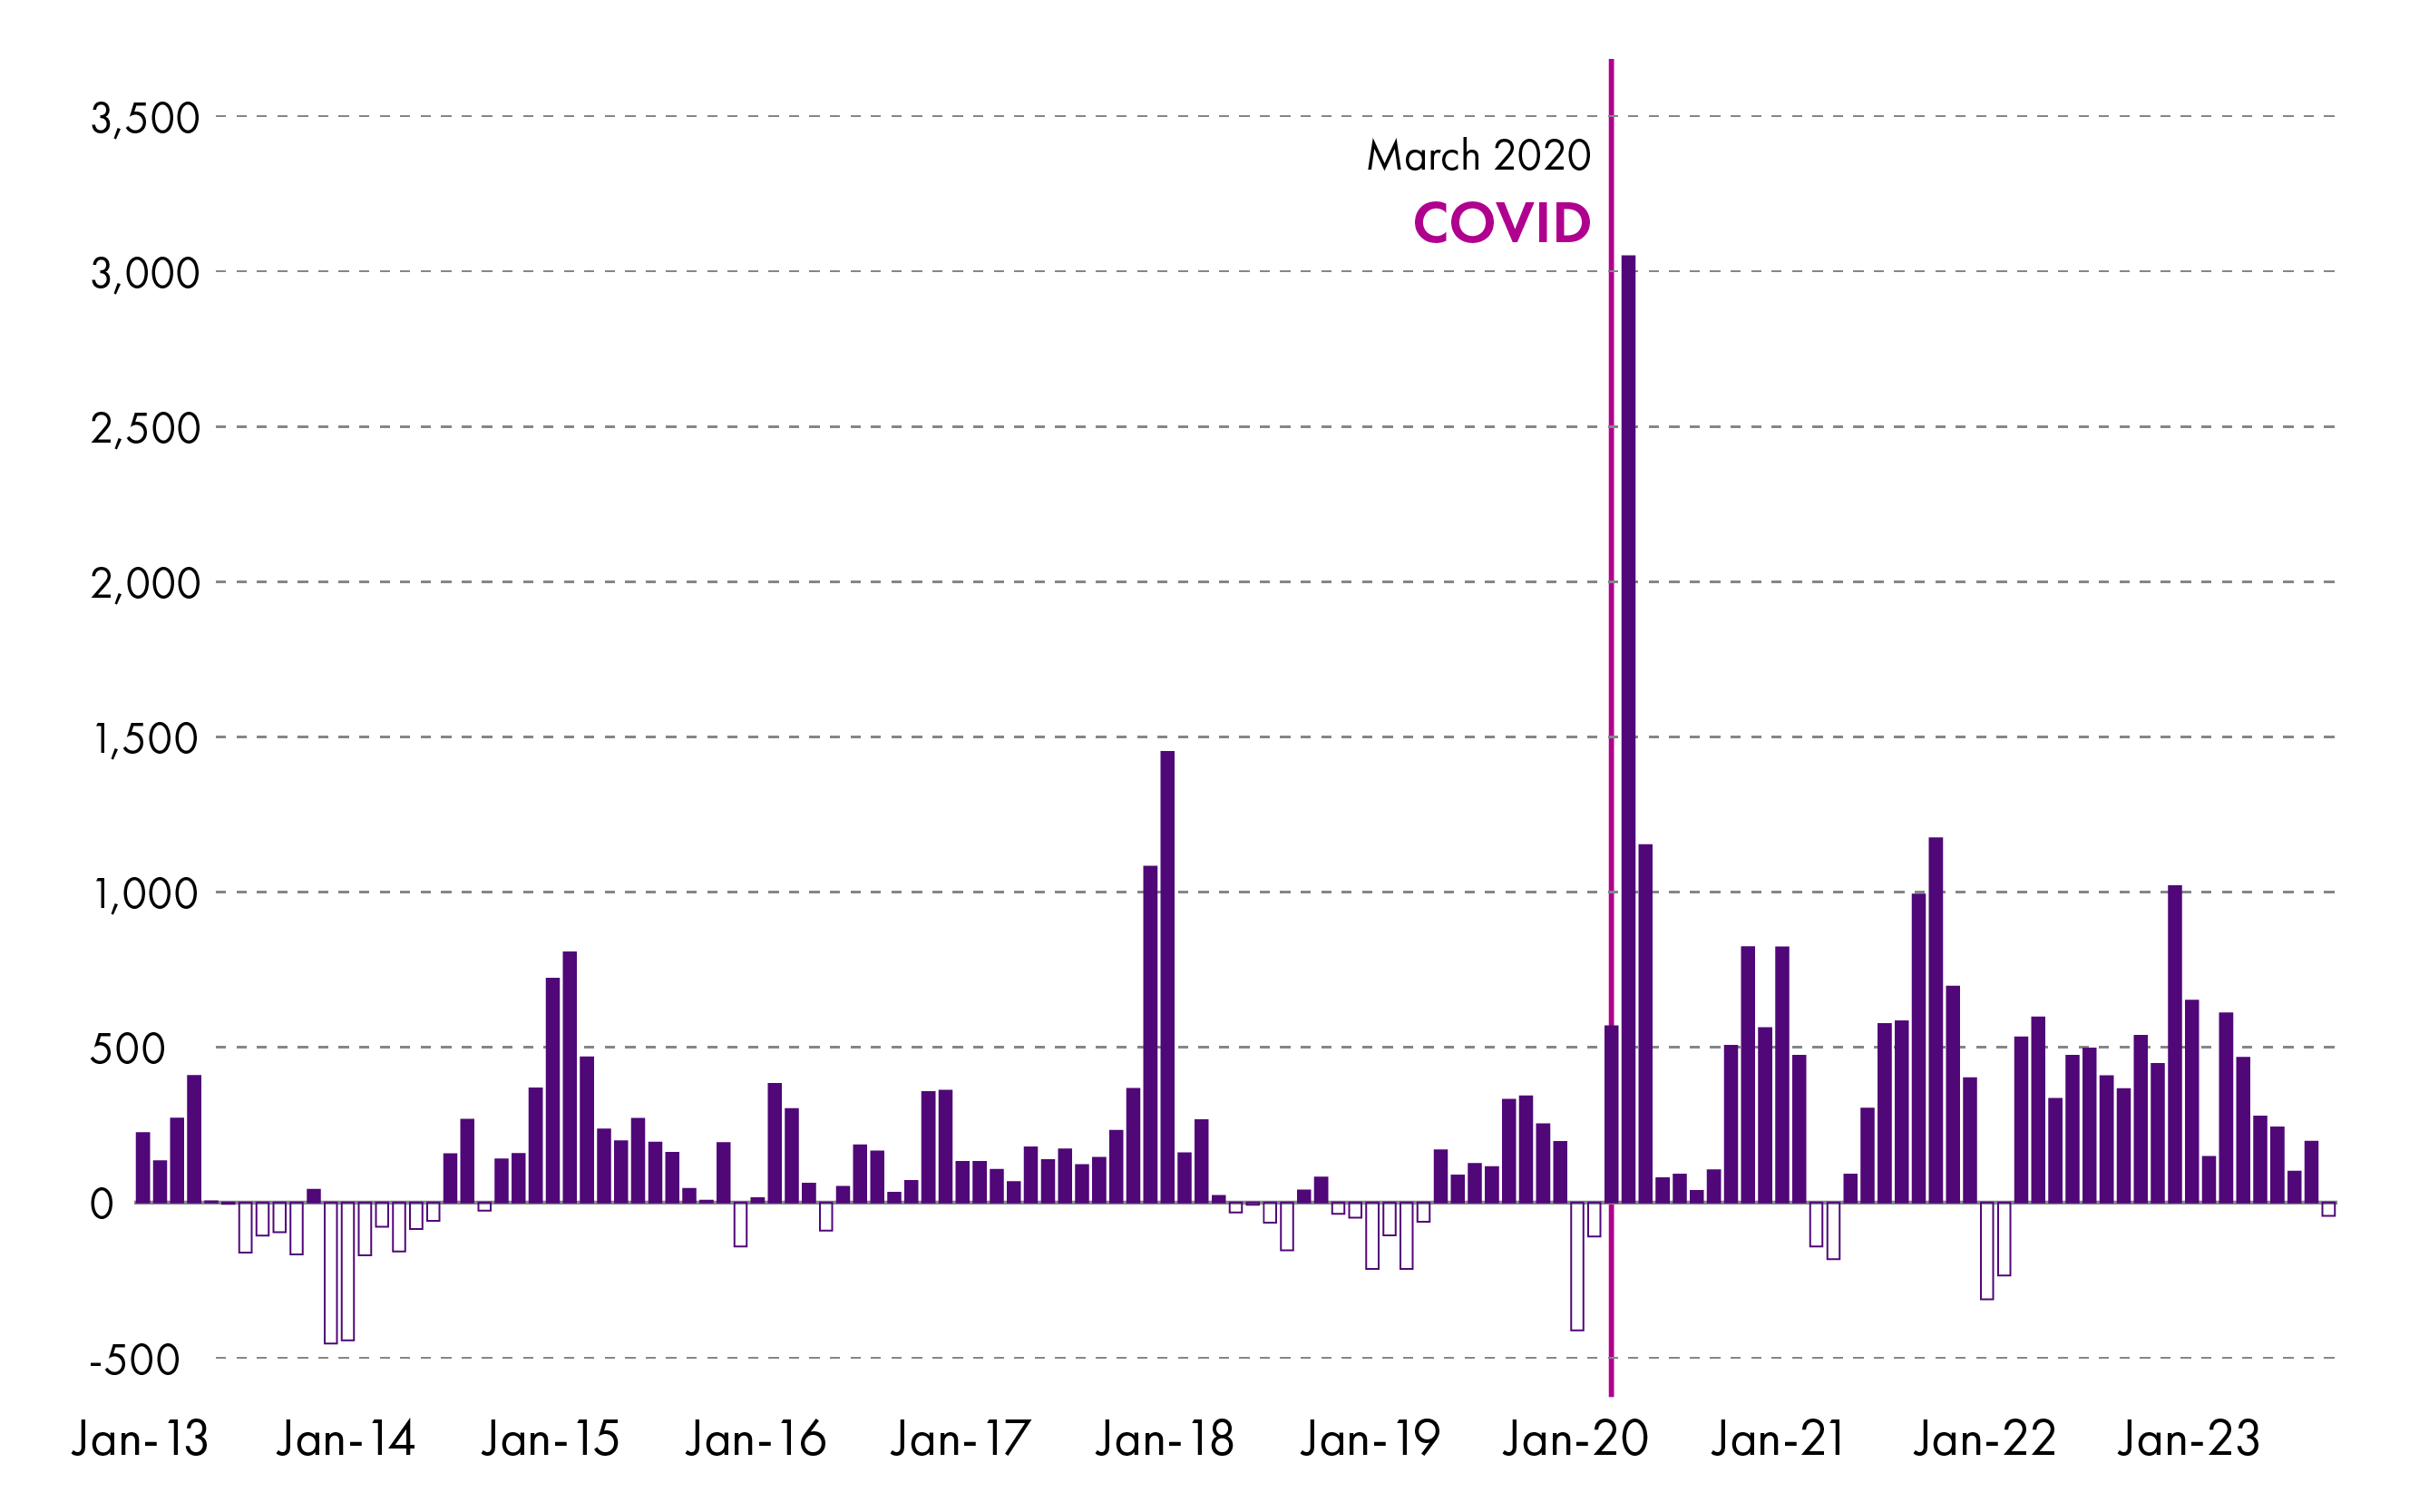 A bar chart show the number of excess deaths from January 2013 onward. During the COVID-19 pandemic period the number of excess deaths was higher than normal.